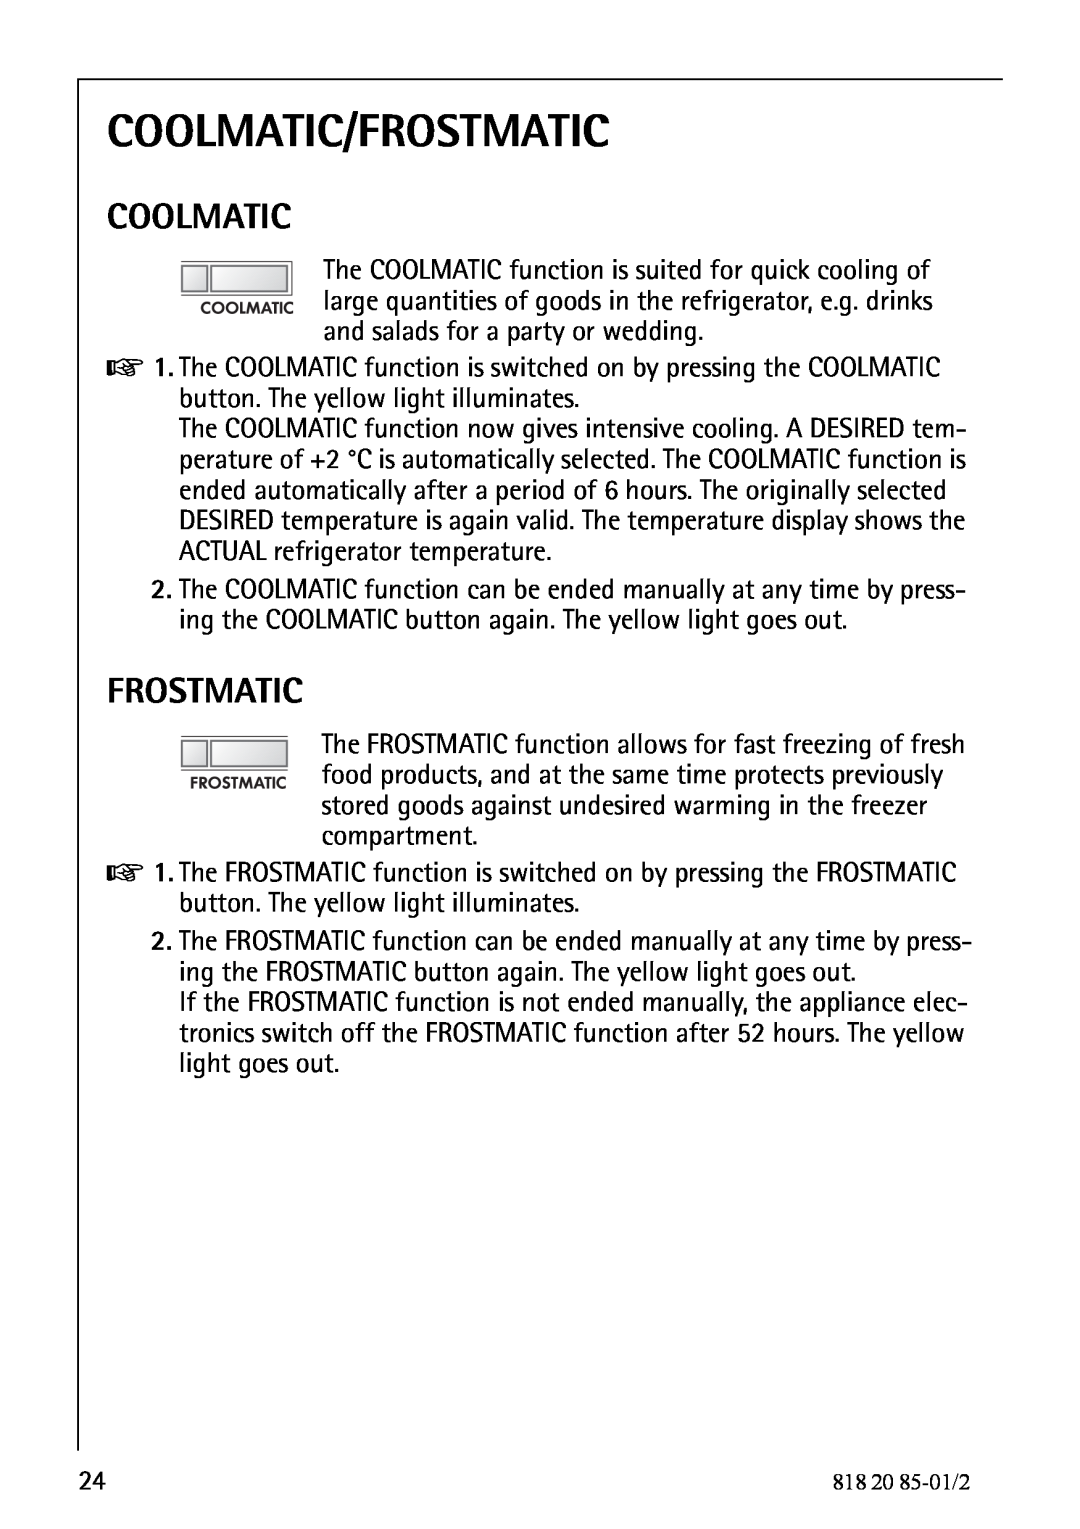 Electrolux 818 20 85 operating instructions Coolmatic/Frostmatic 